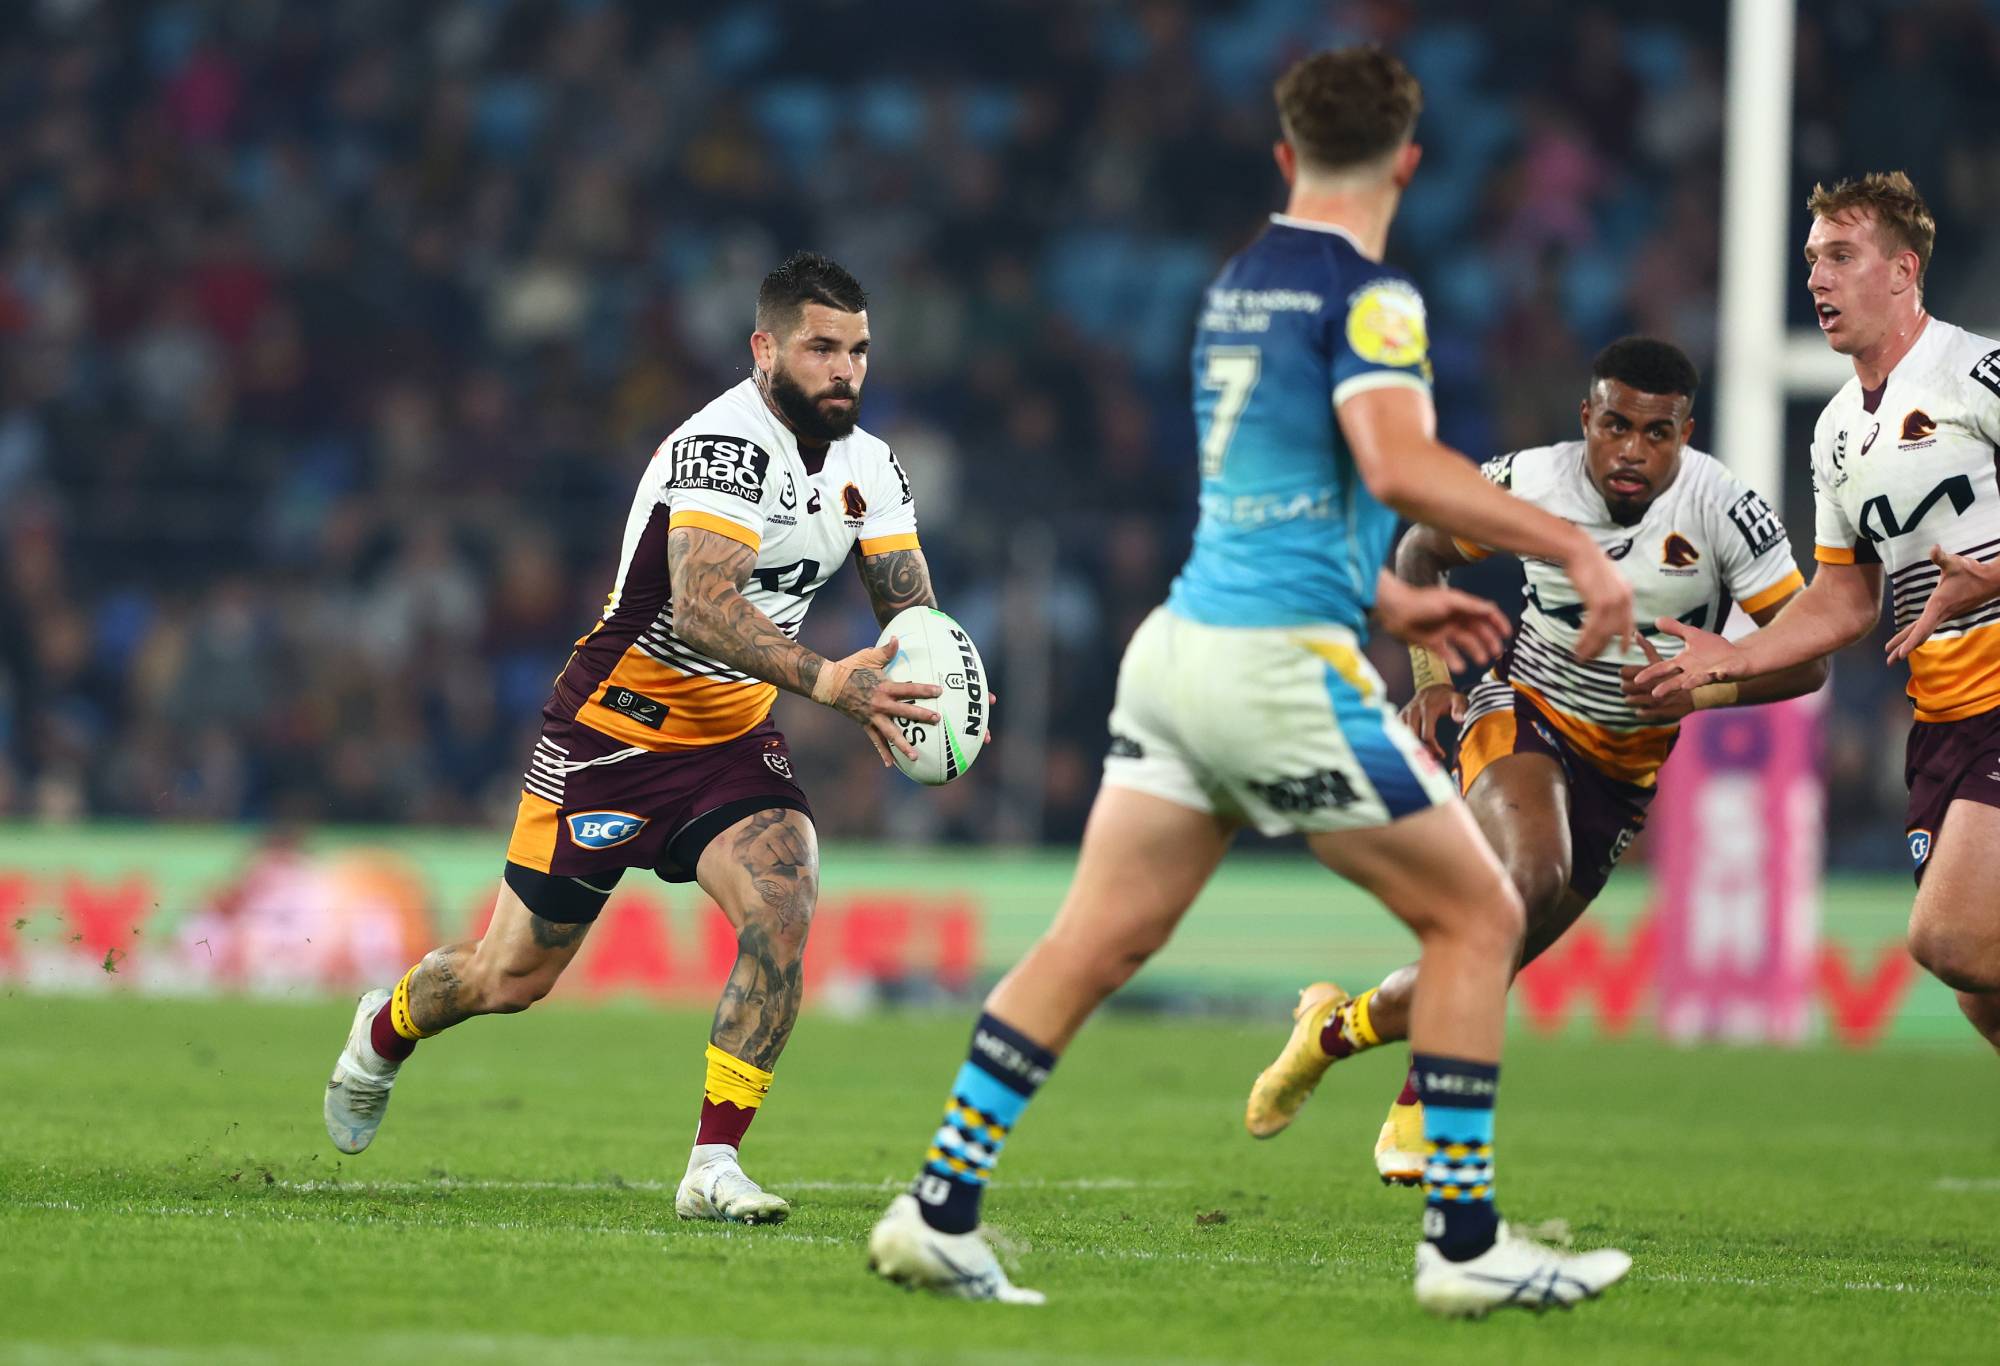 GOLD COAST, AUSTRALIA - JULY 16: Adam Reynolds of the Broncos runs the ball during the round 18 NRL match between the Gold Coast Titans and the Brisbane Broncos at Cbus Super Stadium, on July 16, 2022, in Gold Coast, Australia. (Photo by Chris Hyde/Getty Images)